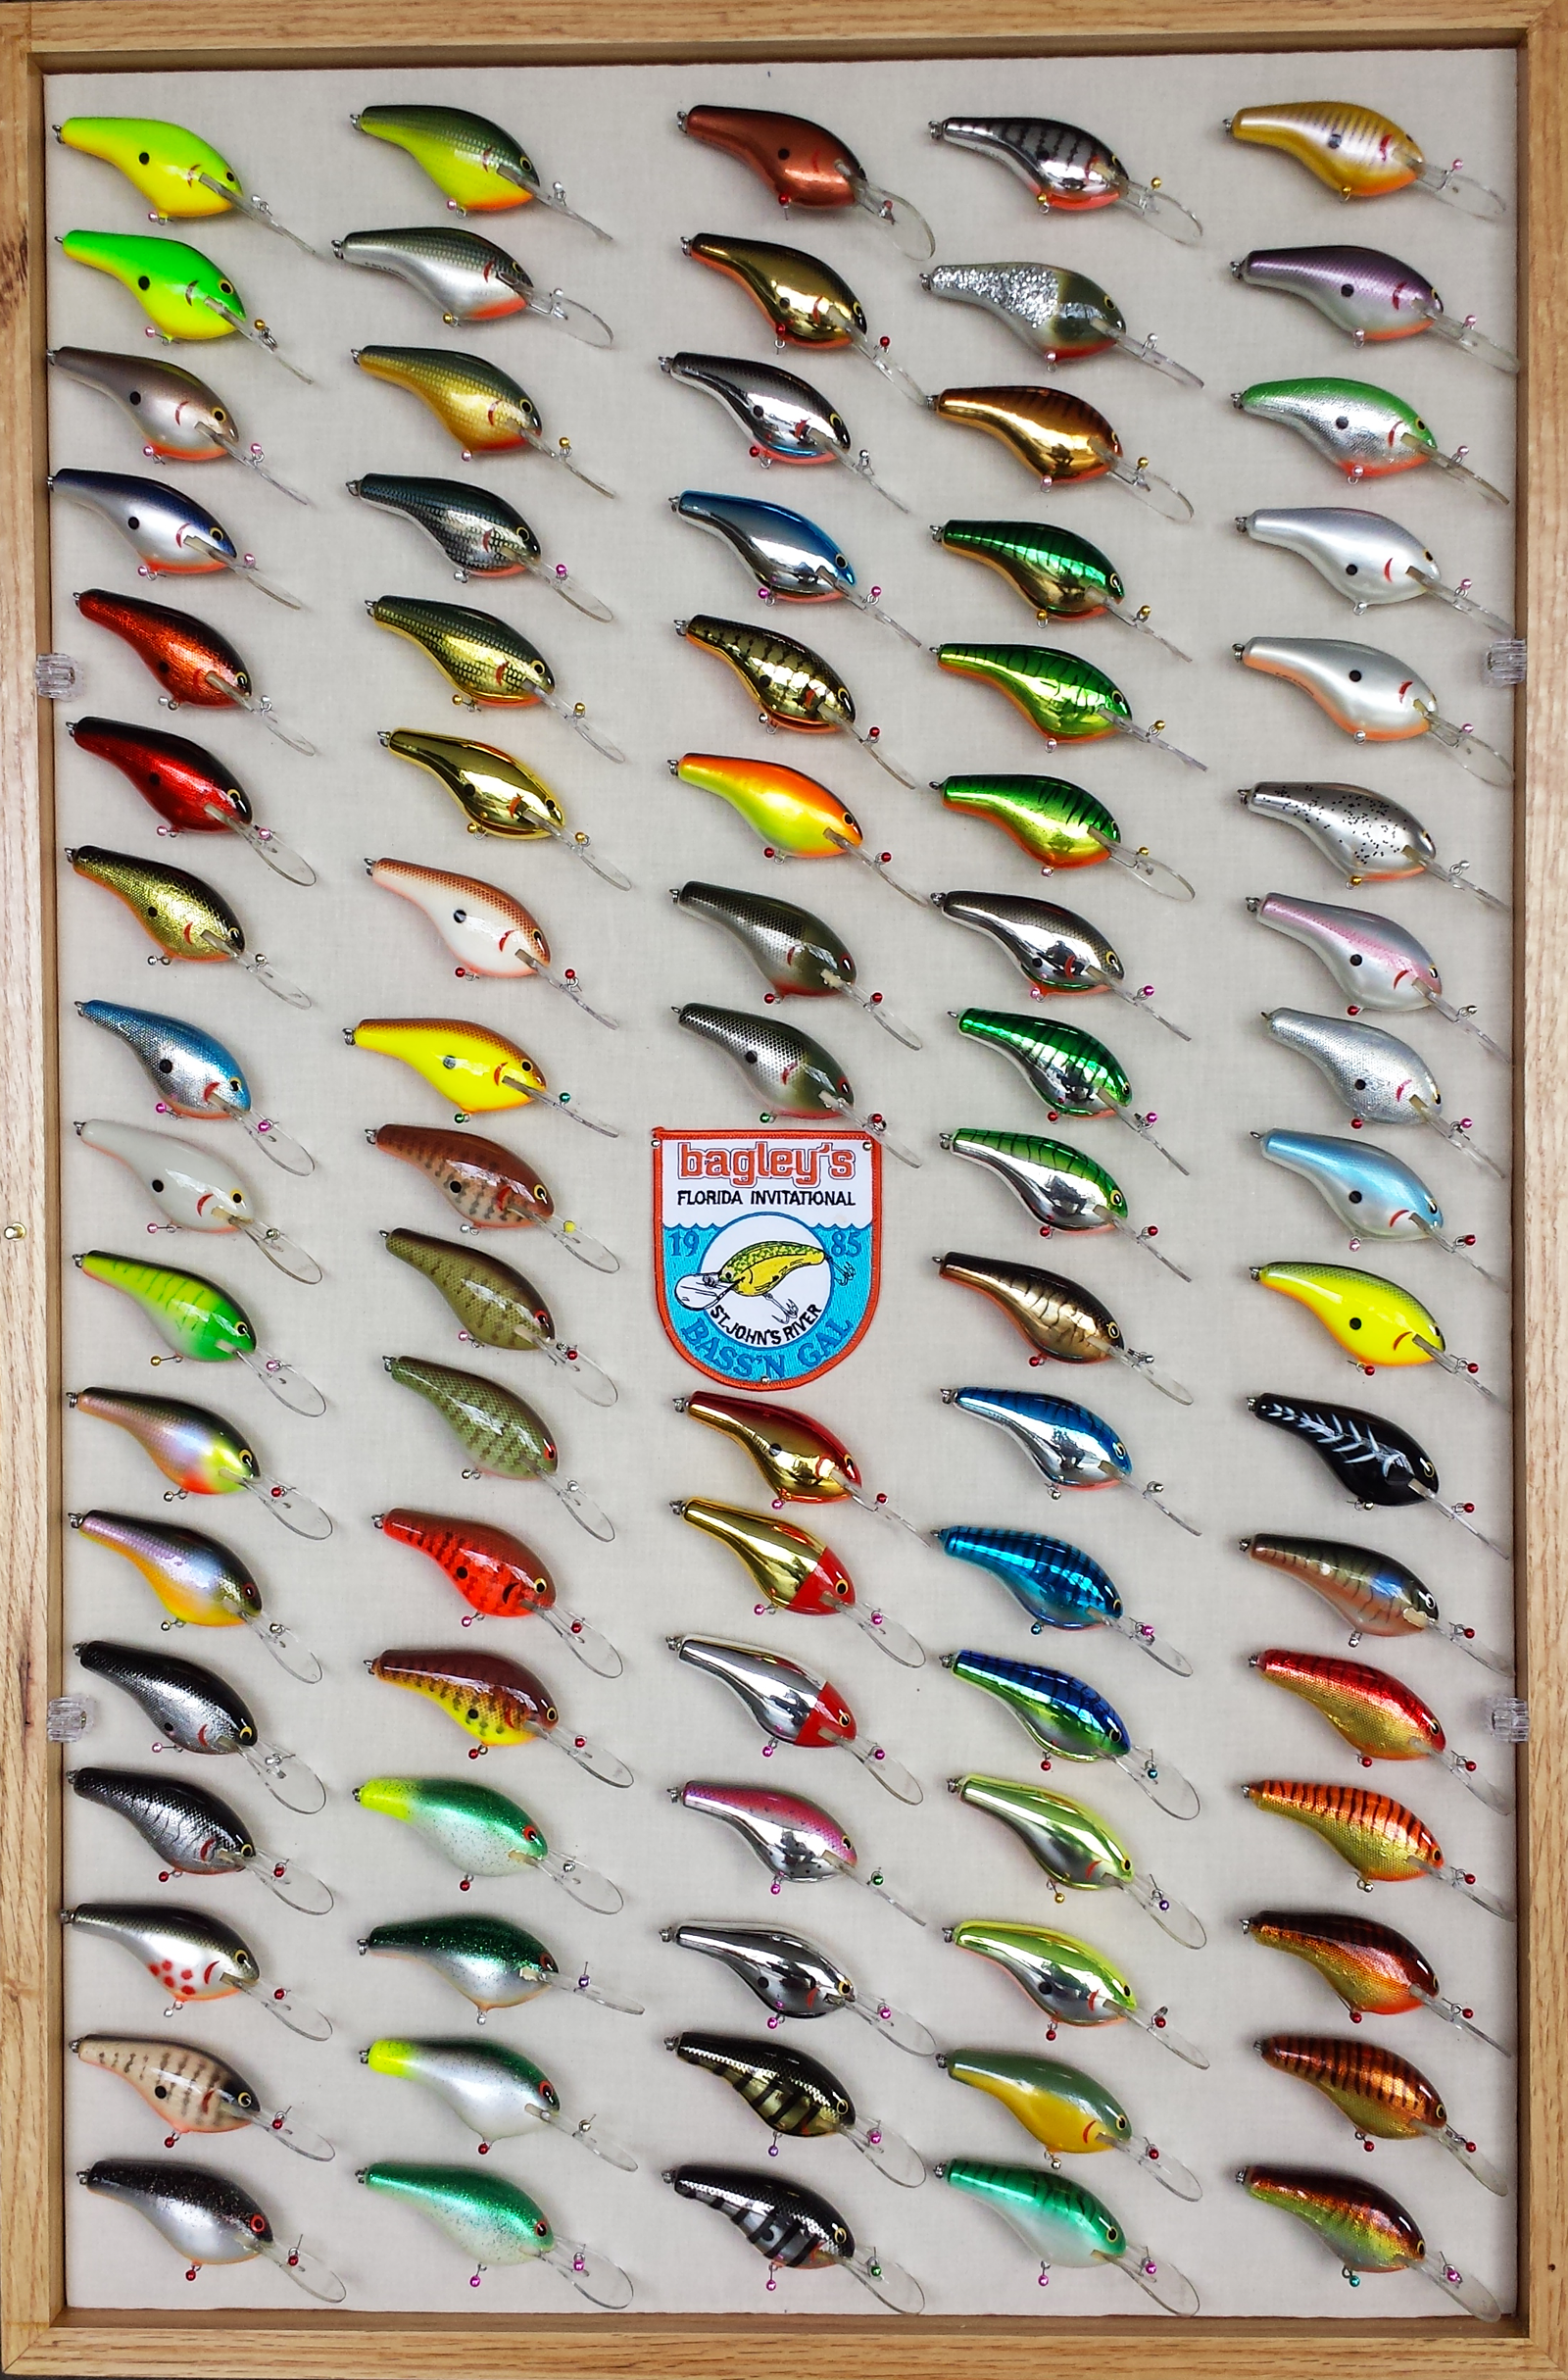 Bill Whitesell's Bagley Lure Collections